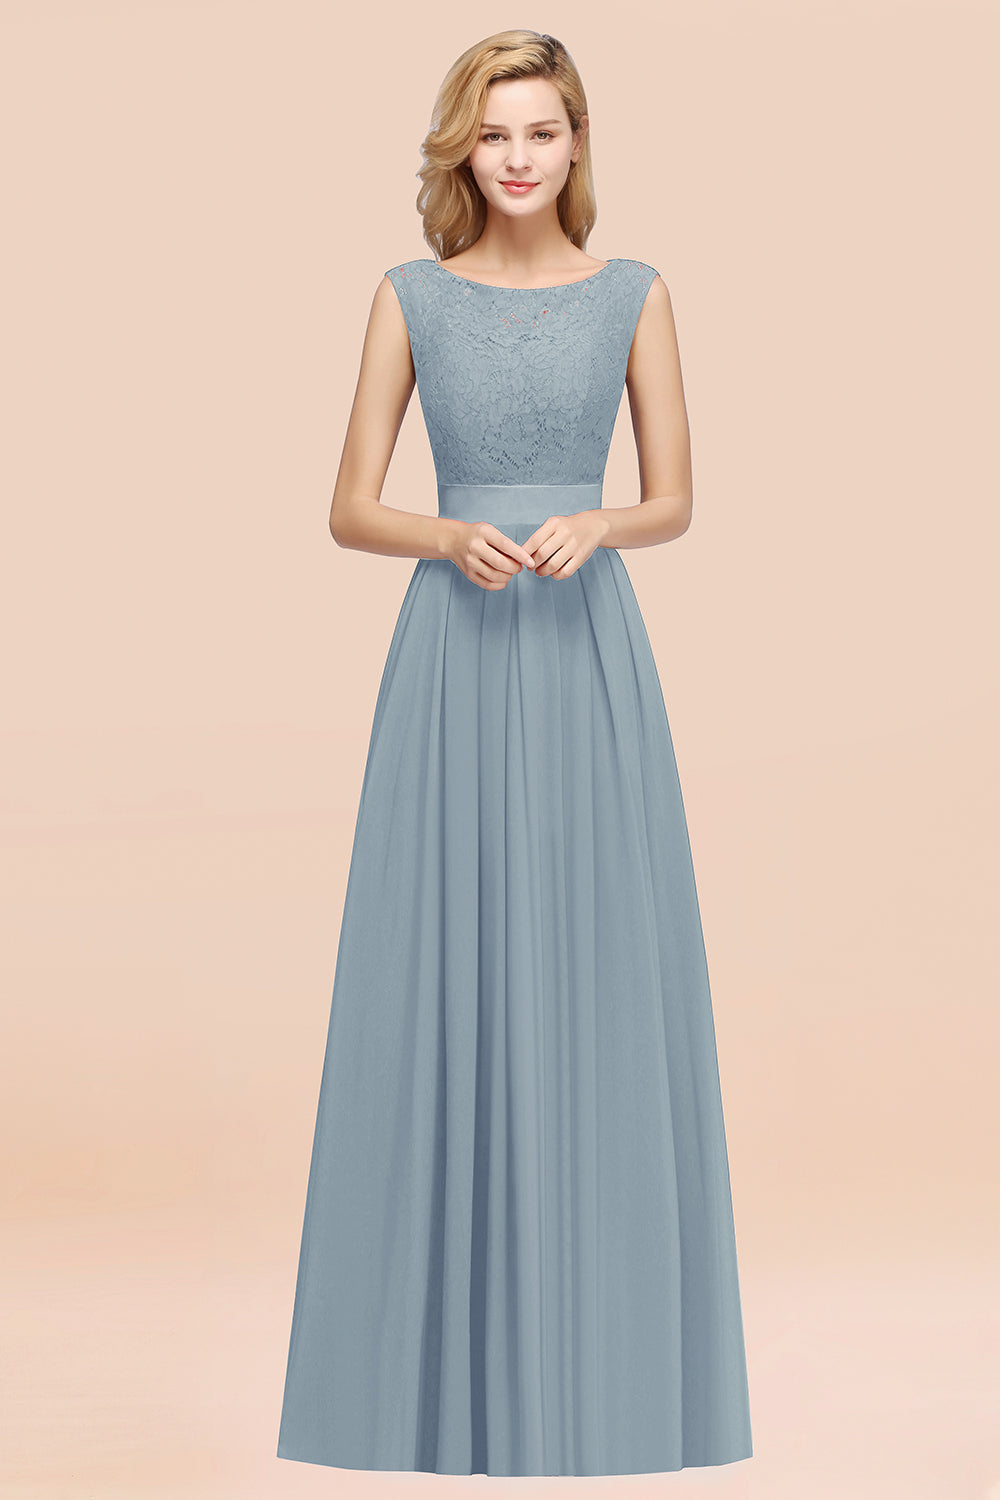 Load image into Gallery viewer, Vintage Sleeveless Lace Bridesmaid Dresses Affordable Chiffon Wedding Party Dress Online-27dress
